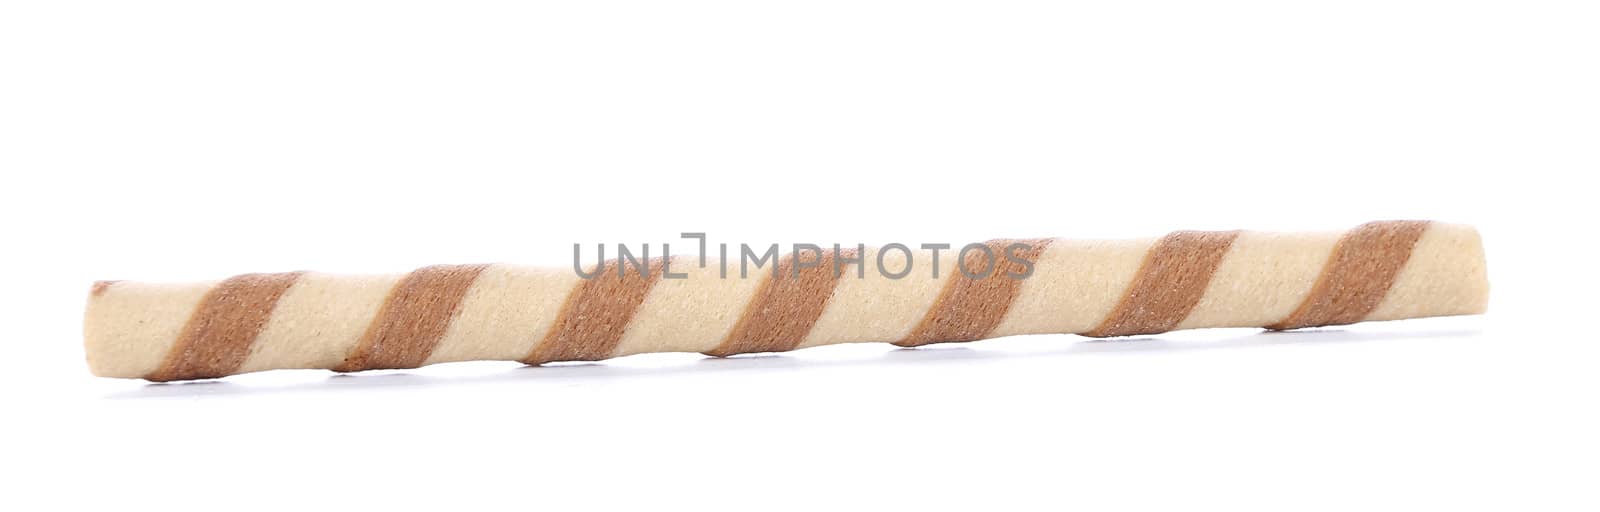 Waffle roll with chocolate cream. Isolated on a white background.